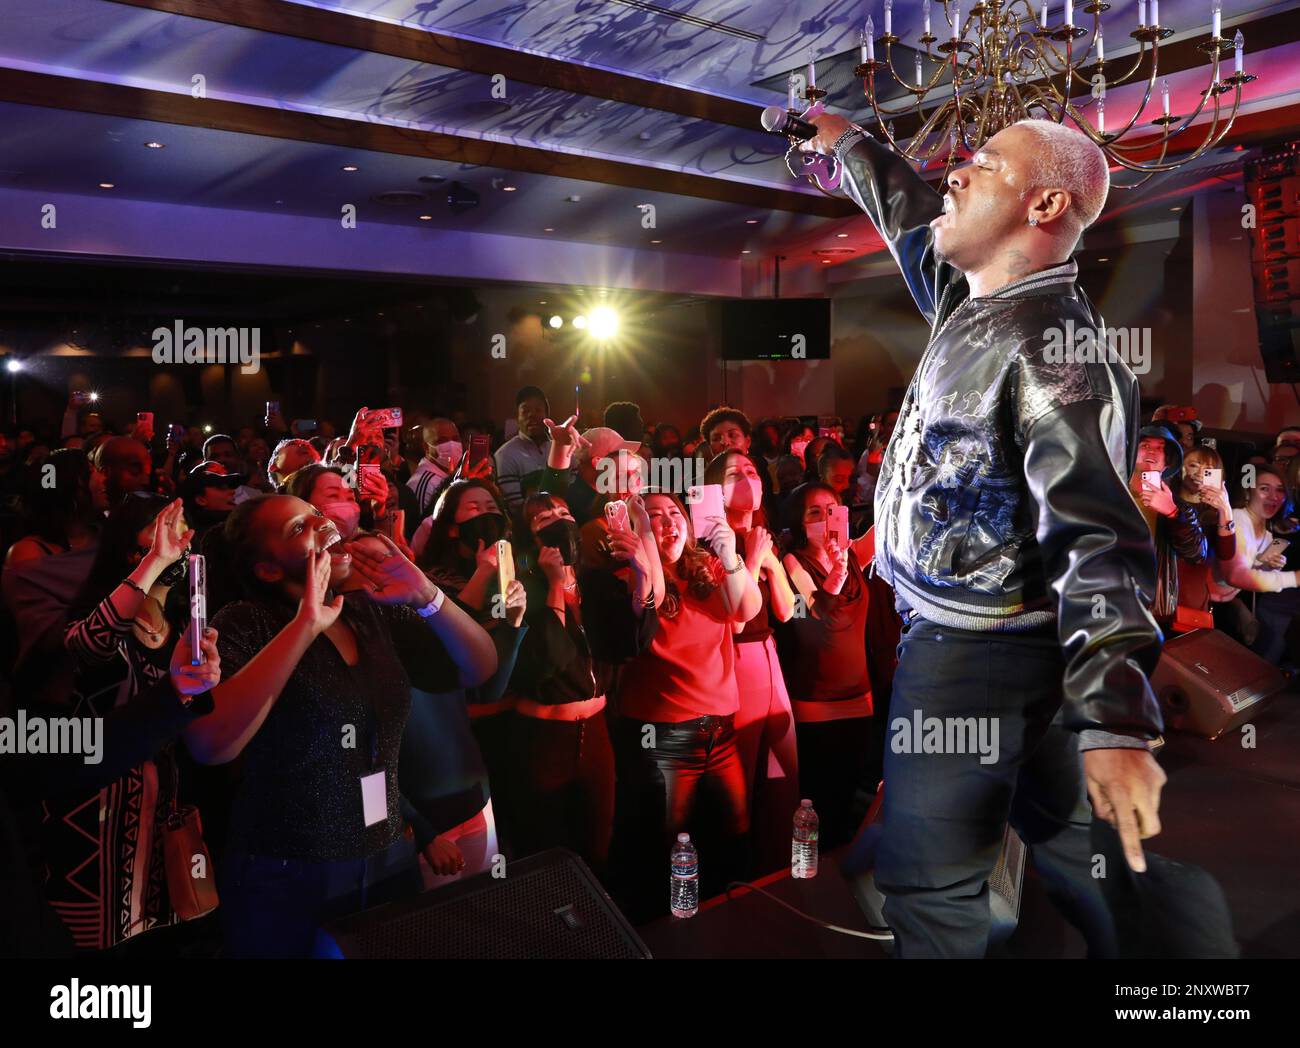 Sisqó, a member of the R&B group Dru Hill, calls out to the crowd during the group’s concert Jan. 10 at the Camp Zama Community Club at Camp Zama, Japan. The group was in Japan as part of a tour of U.S. military bases in Asia in conjunction with Armed Forces Entertainment. Stock Photo